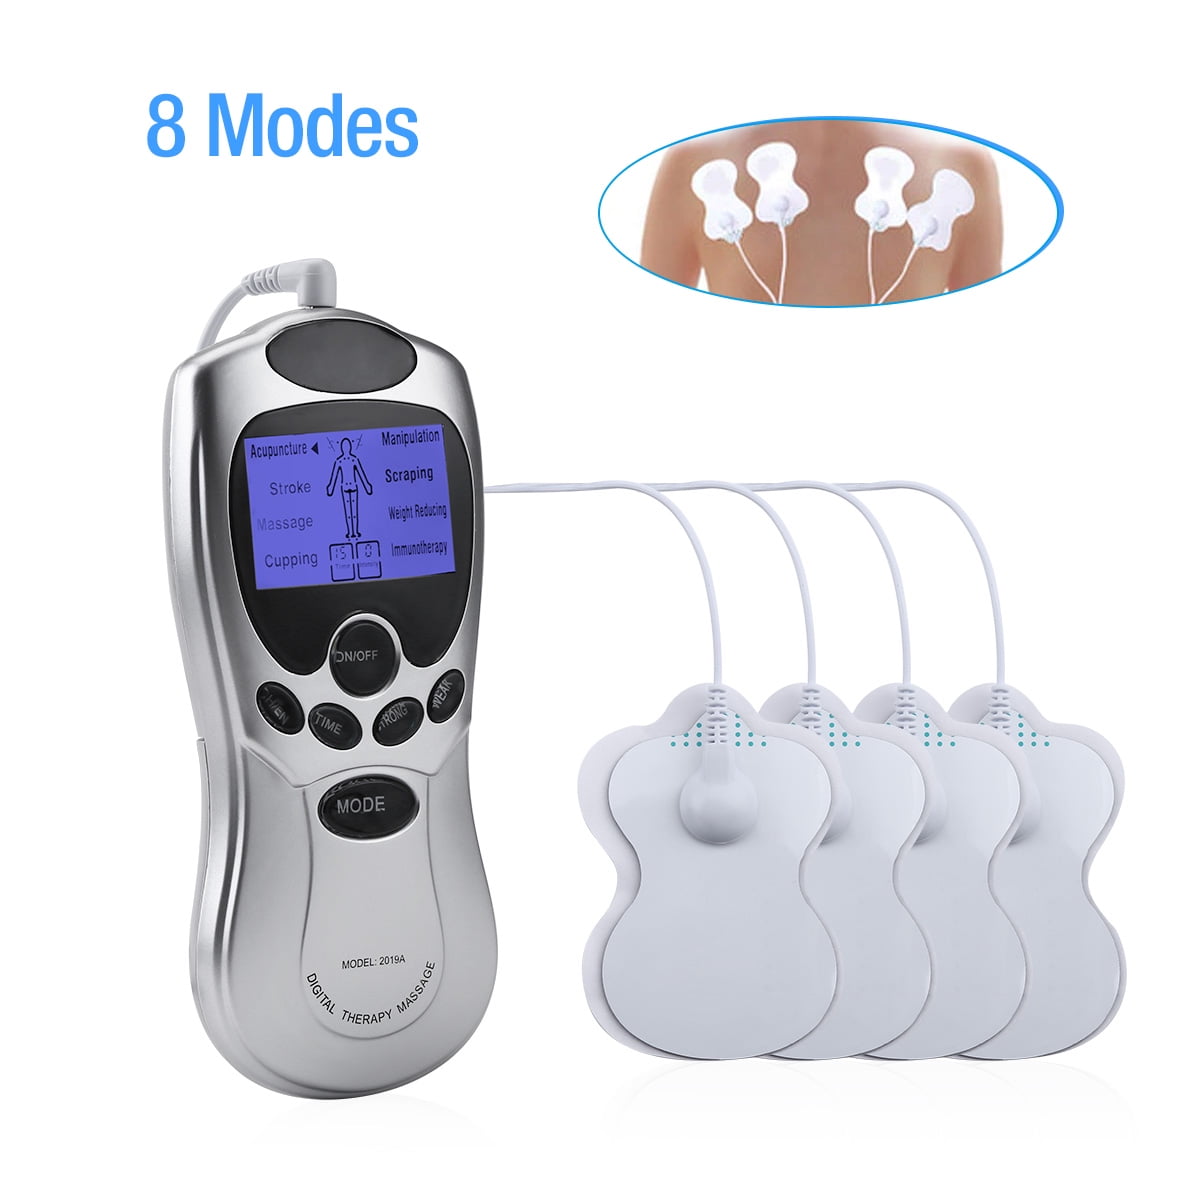 Digital Therapy Machine Pulse Full Body Acupuncture Massager 8 Pads For Health 